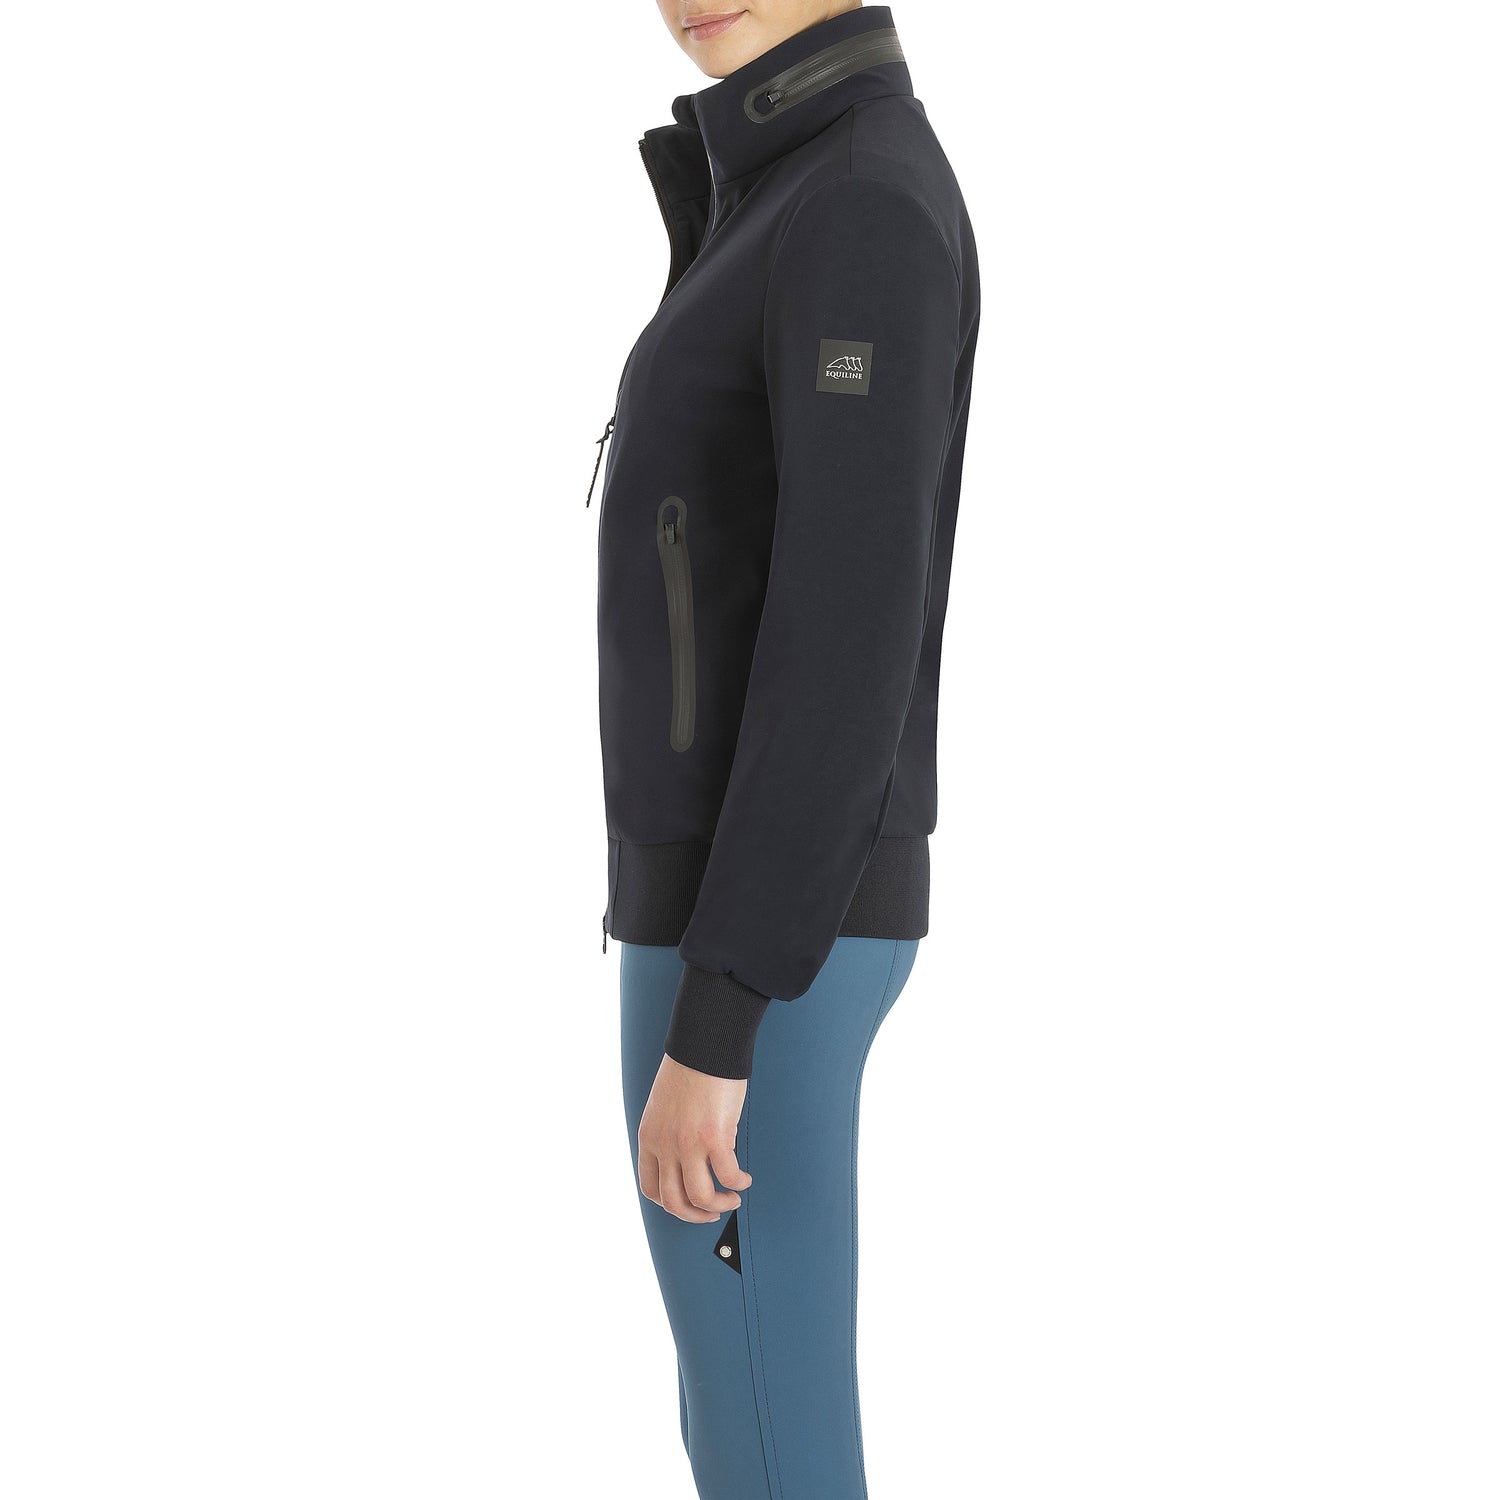 Equiline B-Move Softshell Jacket Cassiec.  B-Move material offers flexibility and full movement when riding.  The jacket is finished with waterproof zippers, and a hidden hood.